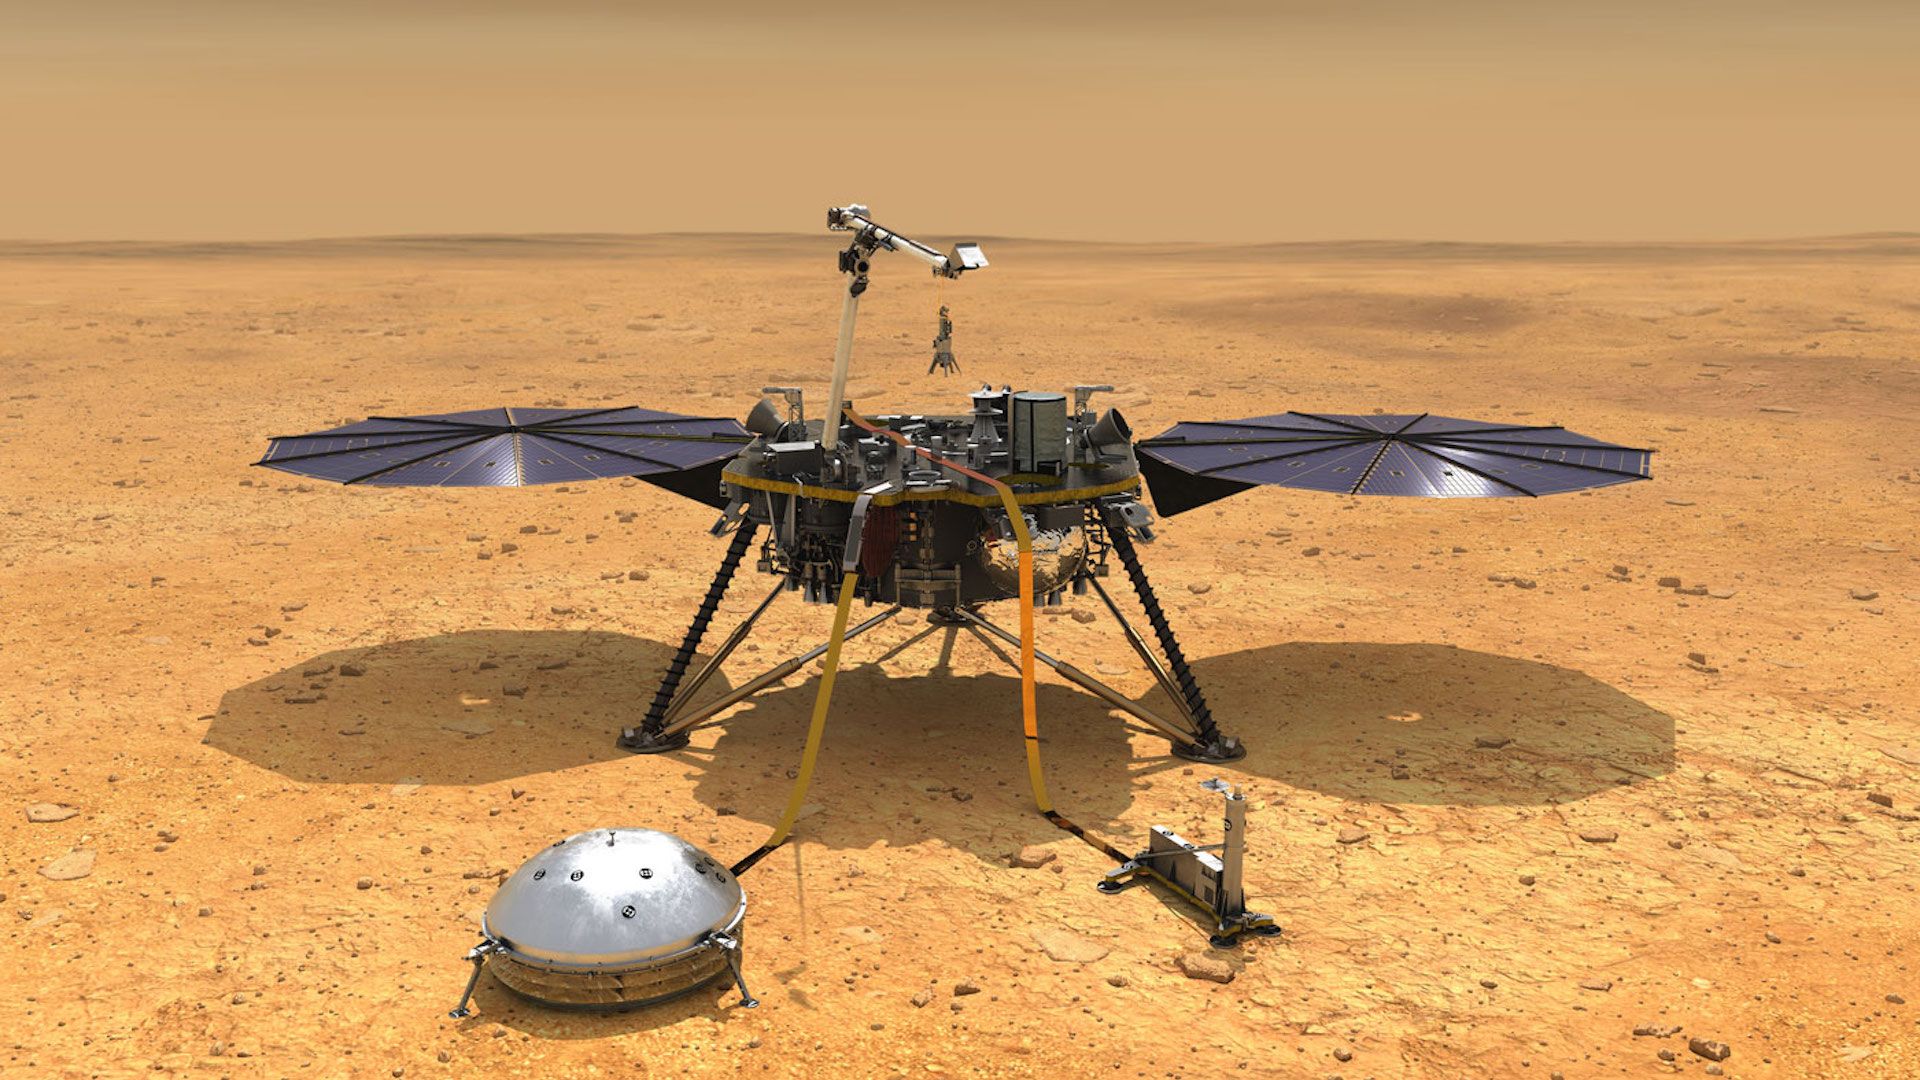 The Mars InSight lander as depicted in an illustration with its instruments deployed on the surface of Mars.